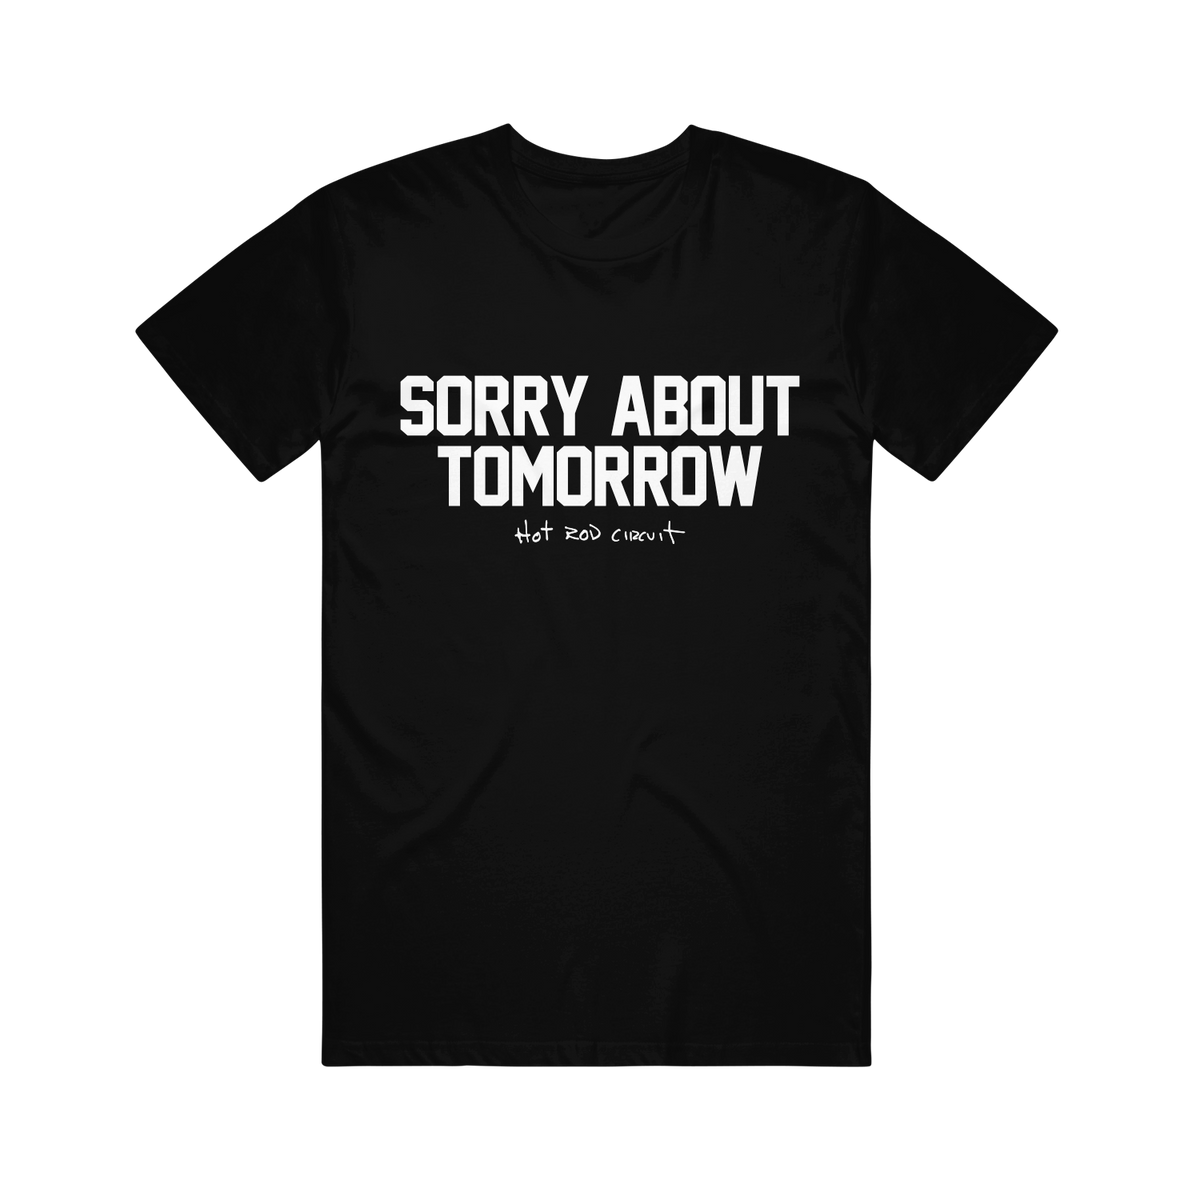 Hot Rod Circuit - Sorry About Tomorrow Black Tee – Some Merch